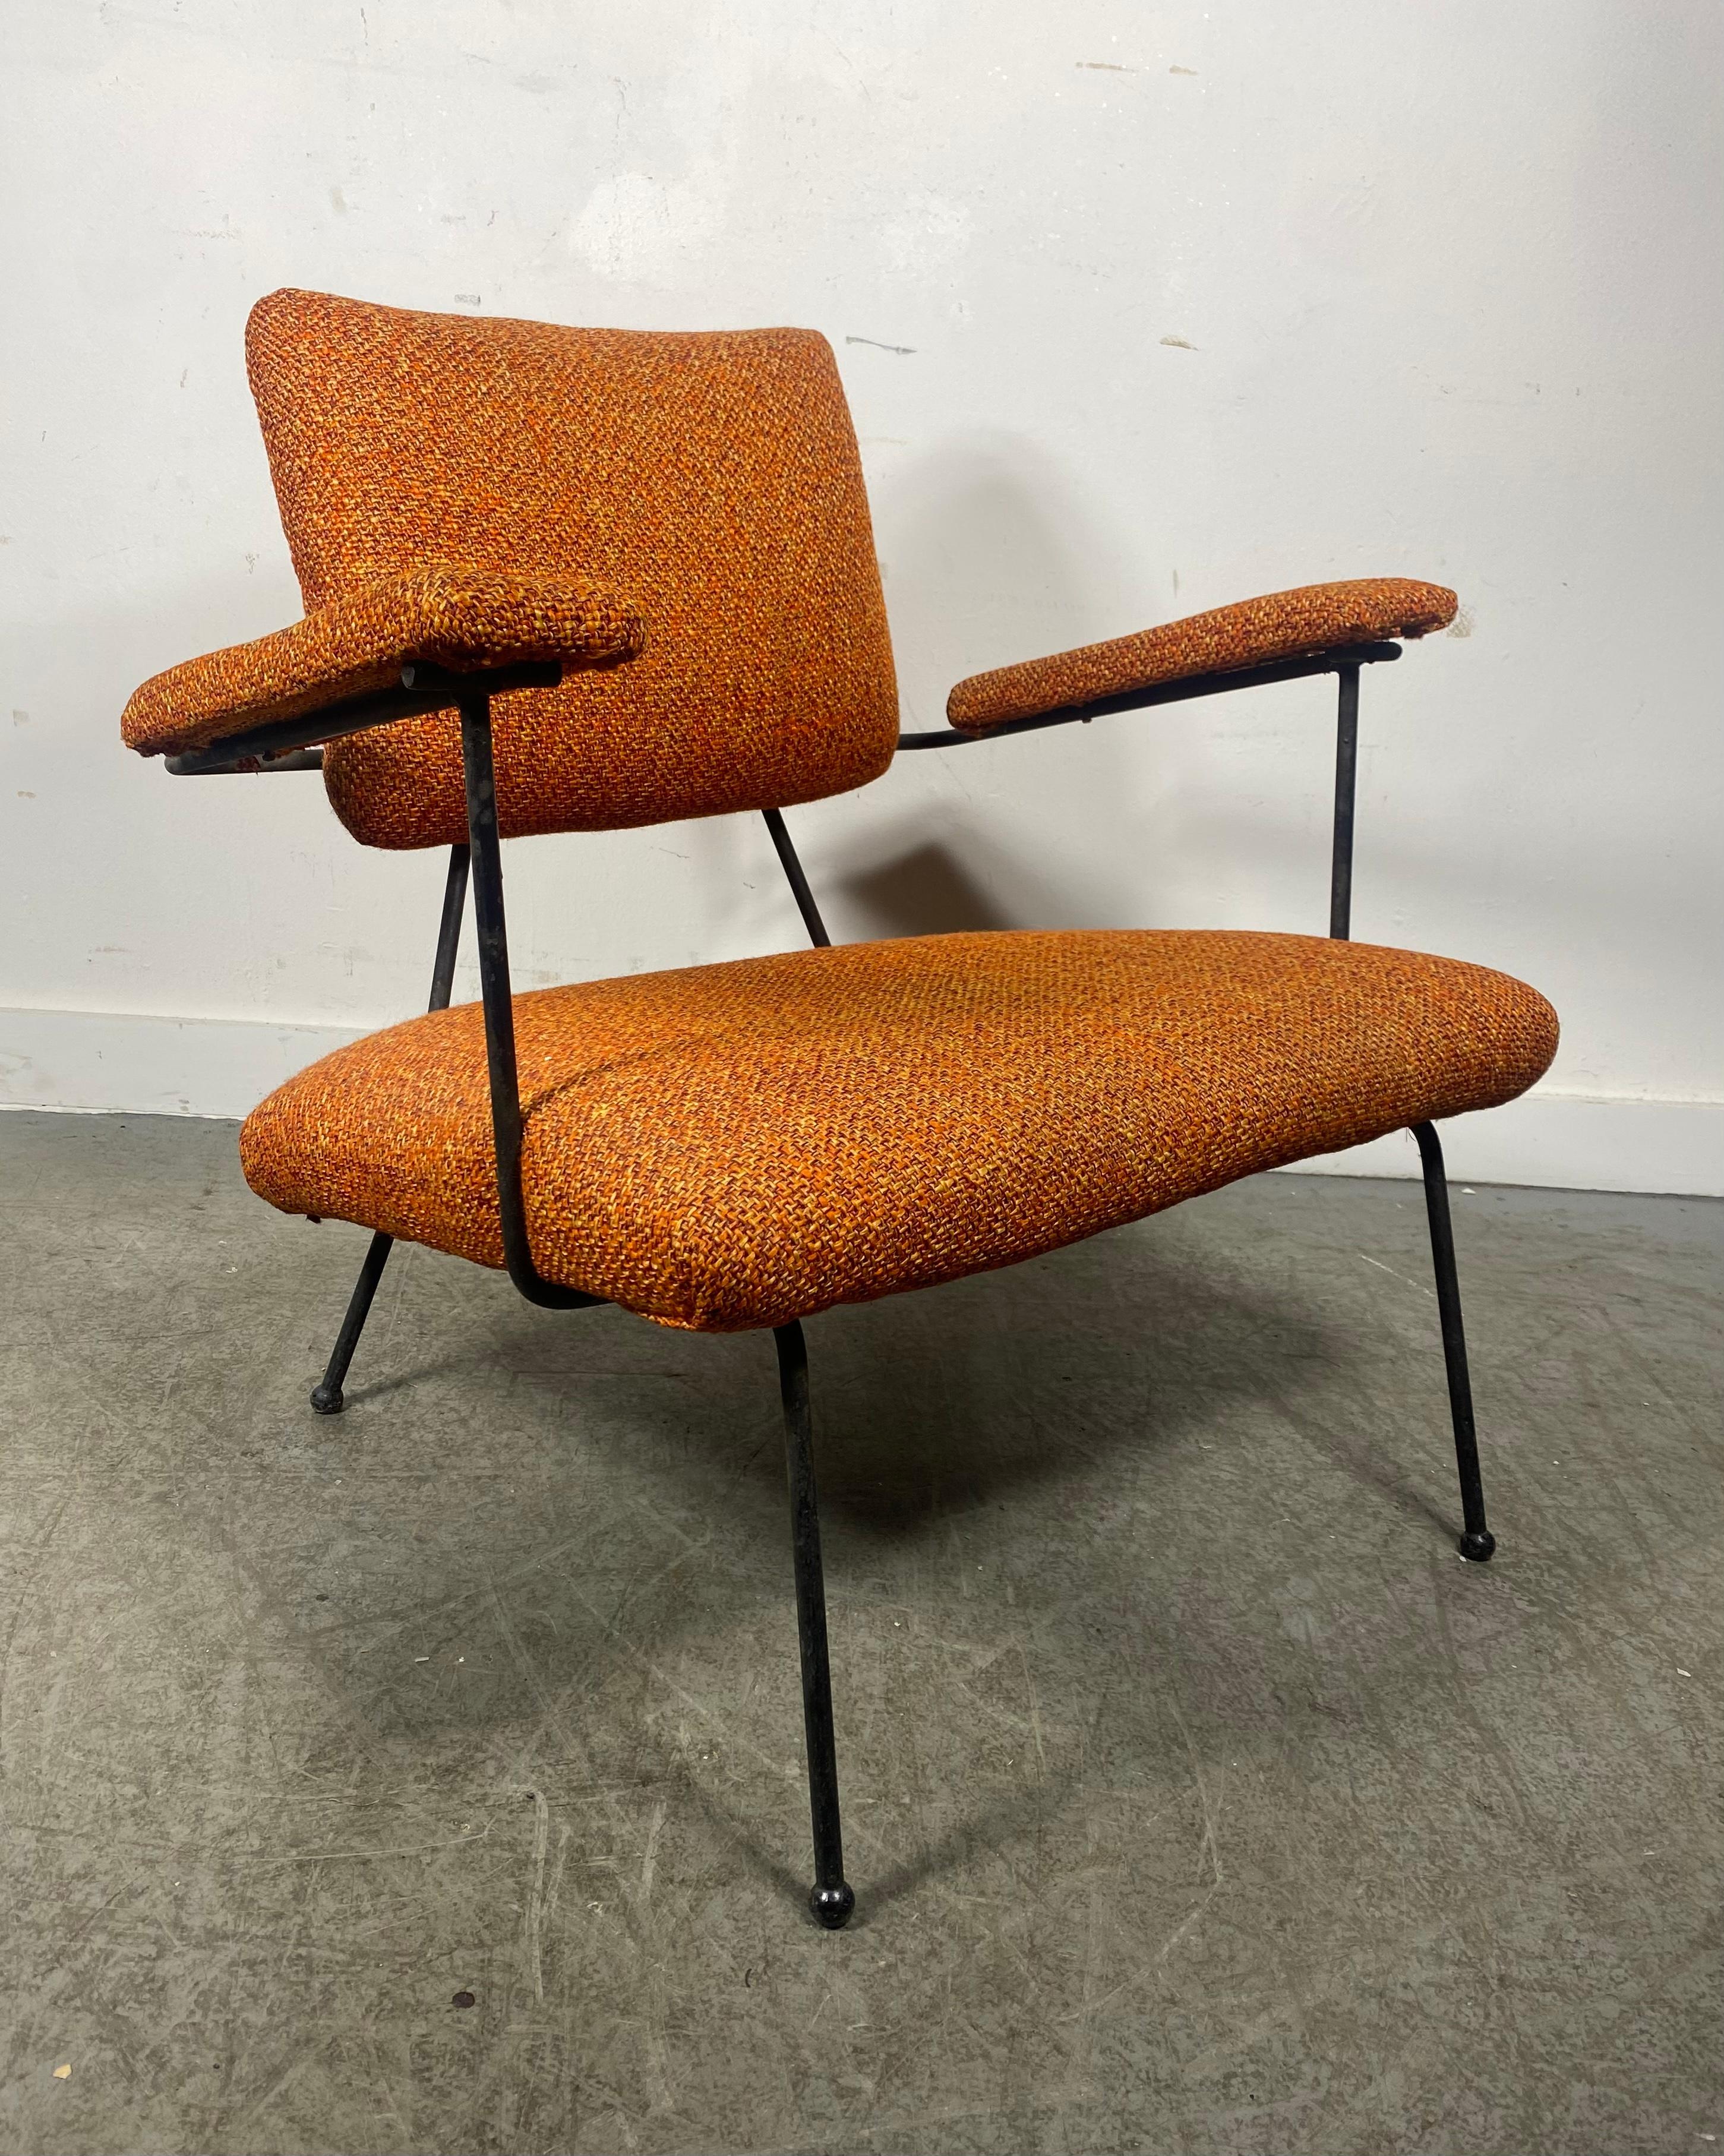 A stunning, rare , stylish and super comfortable Adrian Pearsall for Craft Associates iron frame armchair in original fabric...Signed with the Craft Associates tag.Hand delivery avail to New York City or anywhere en route from Buffalo